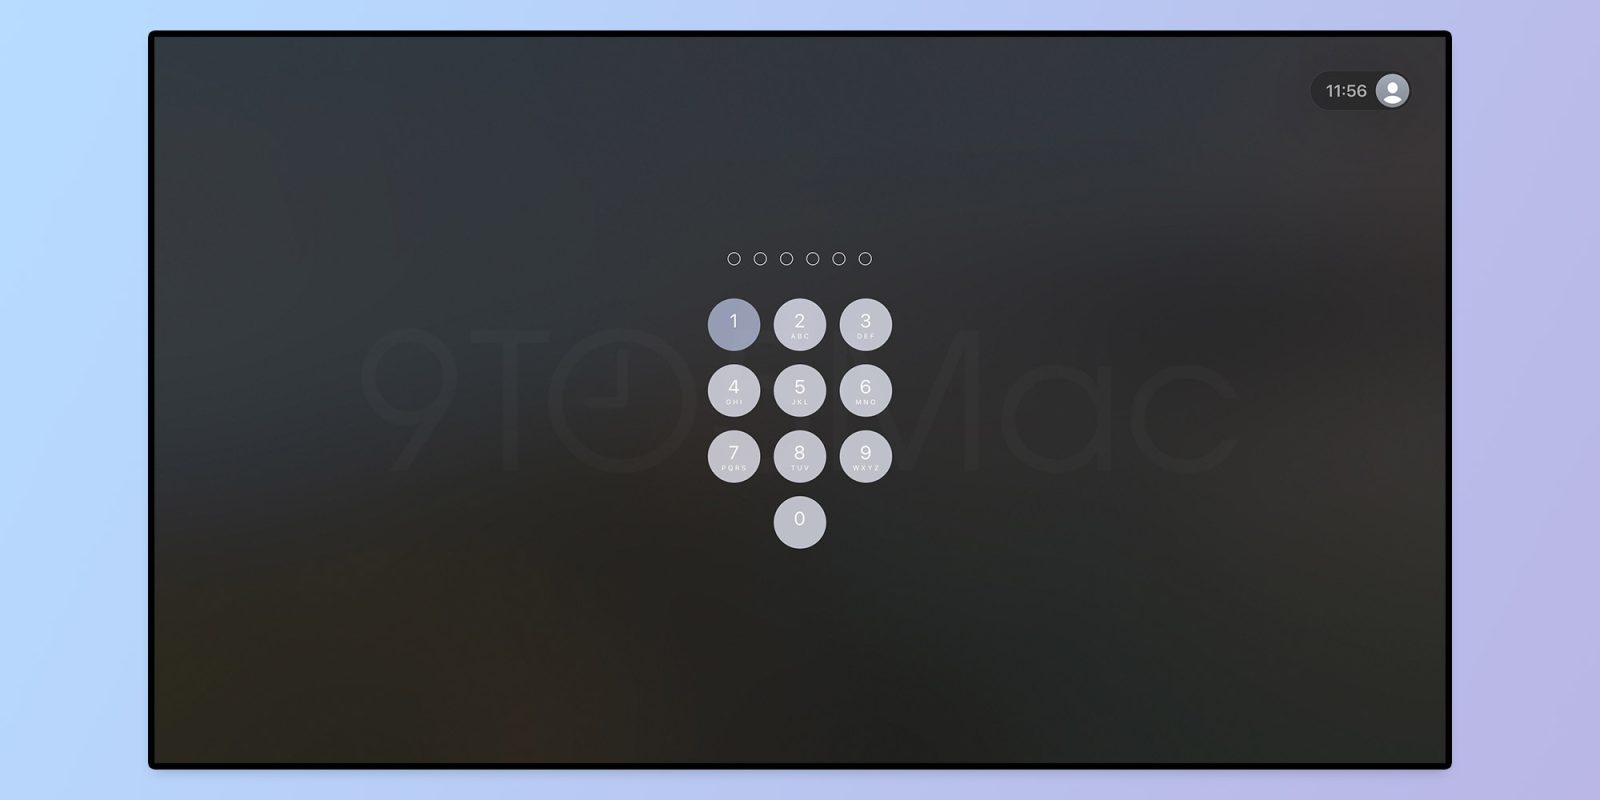 Touchscreen-ready interface hidden in tvOS beta amid rumors of HomePod with display